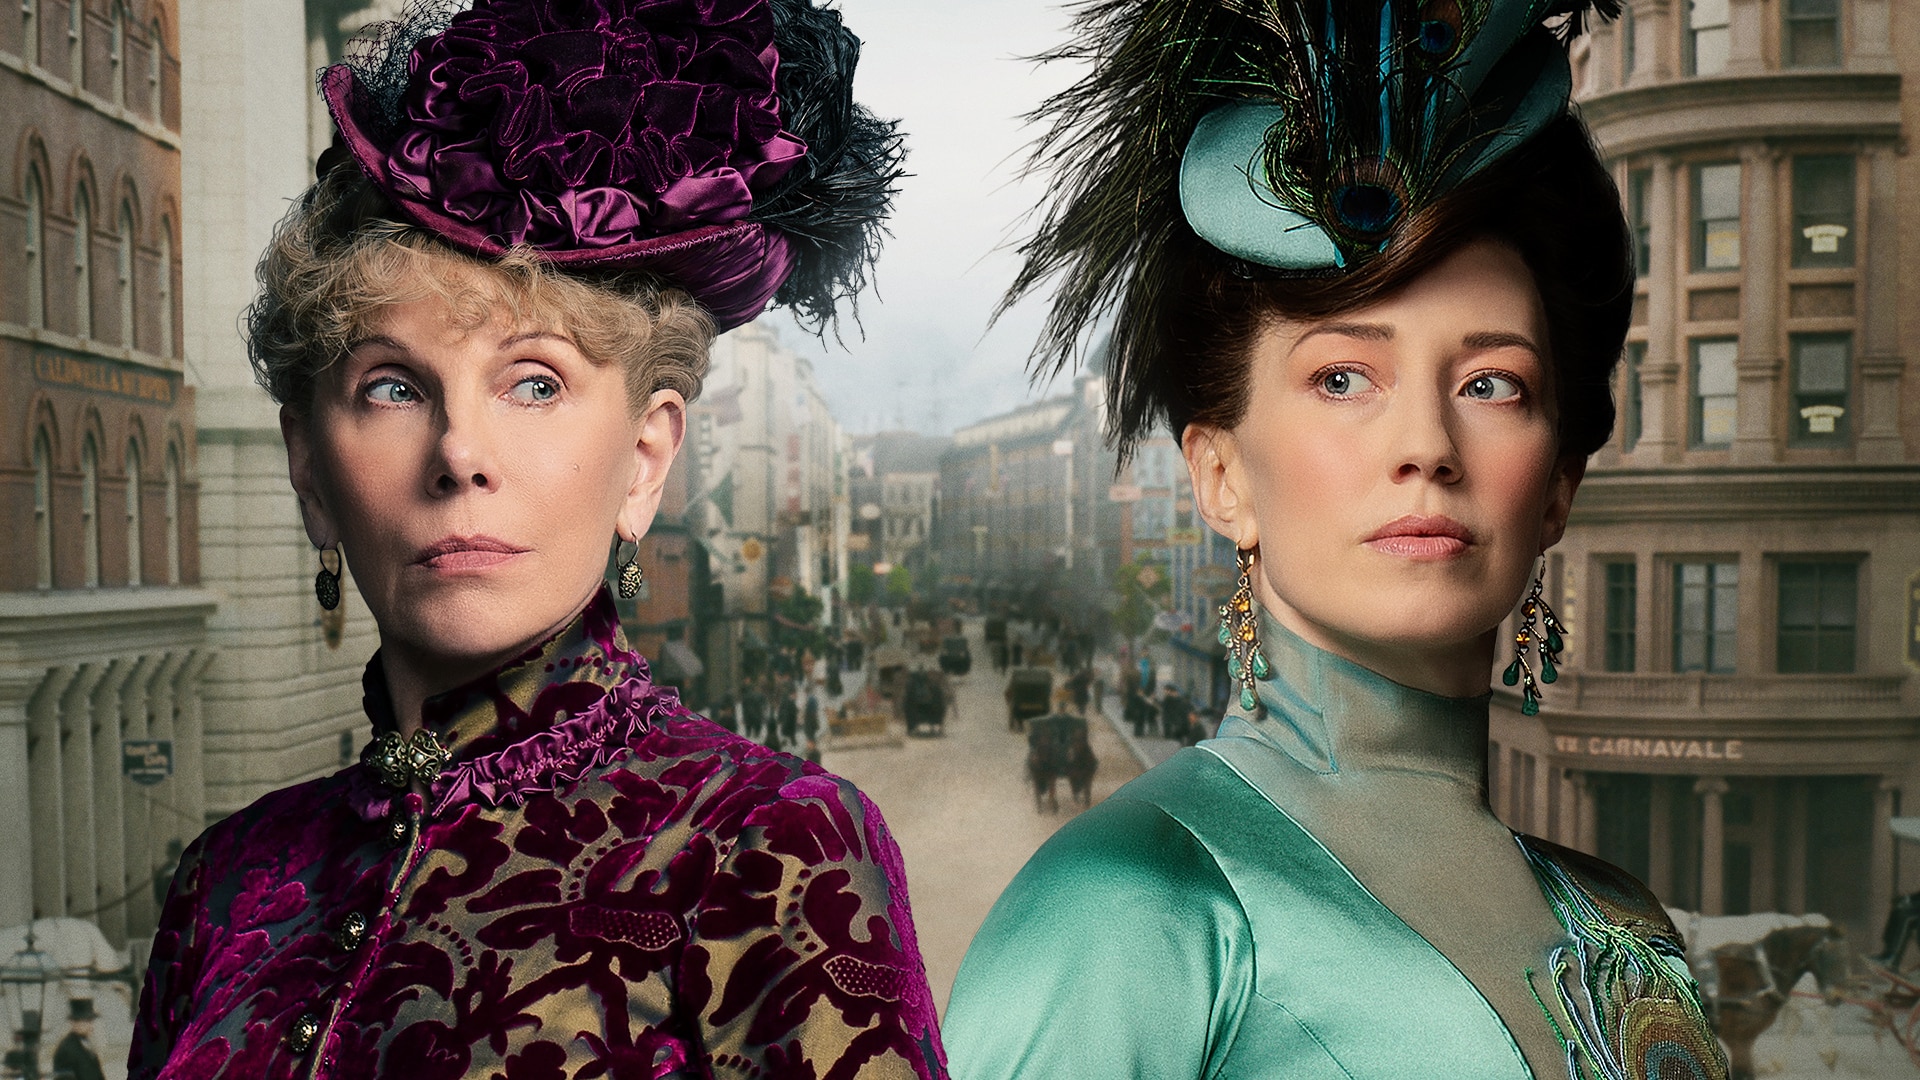 Christine Baranski and Carrie Coon in The Gilded Age. Courtesy of Max.